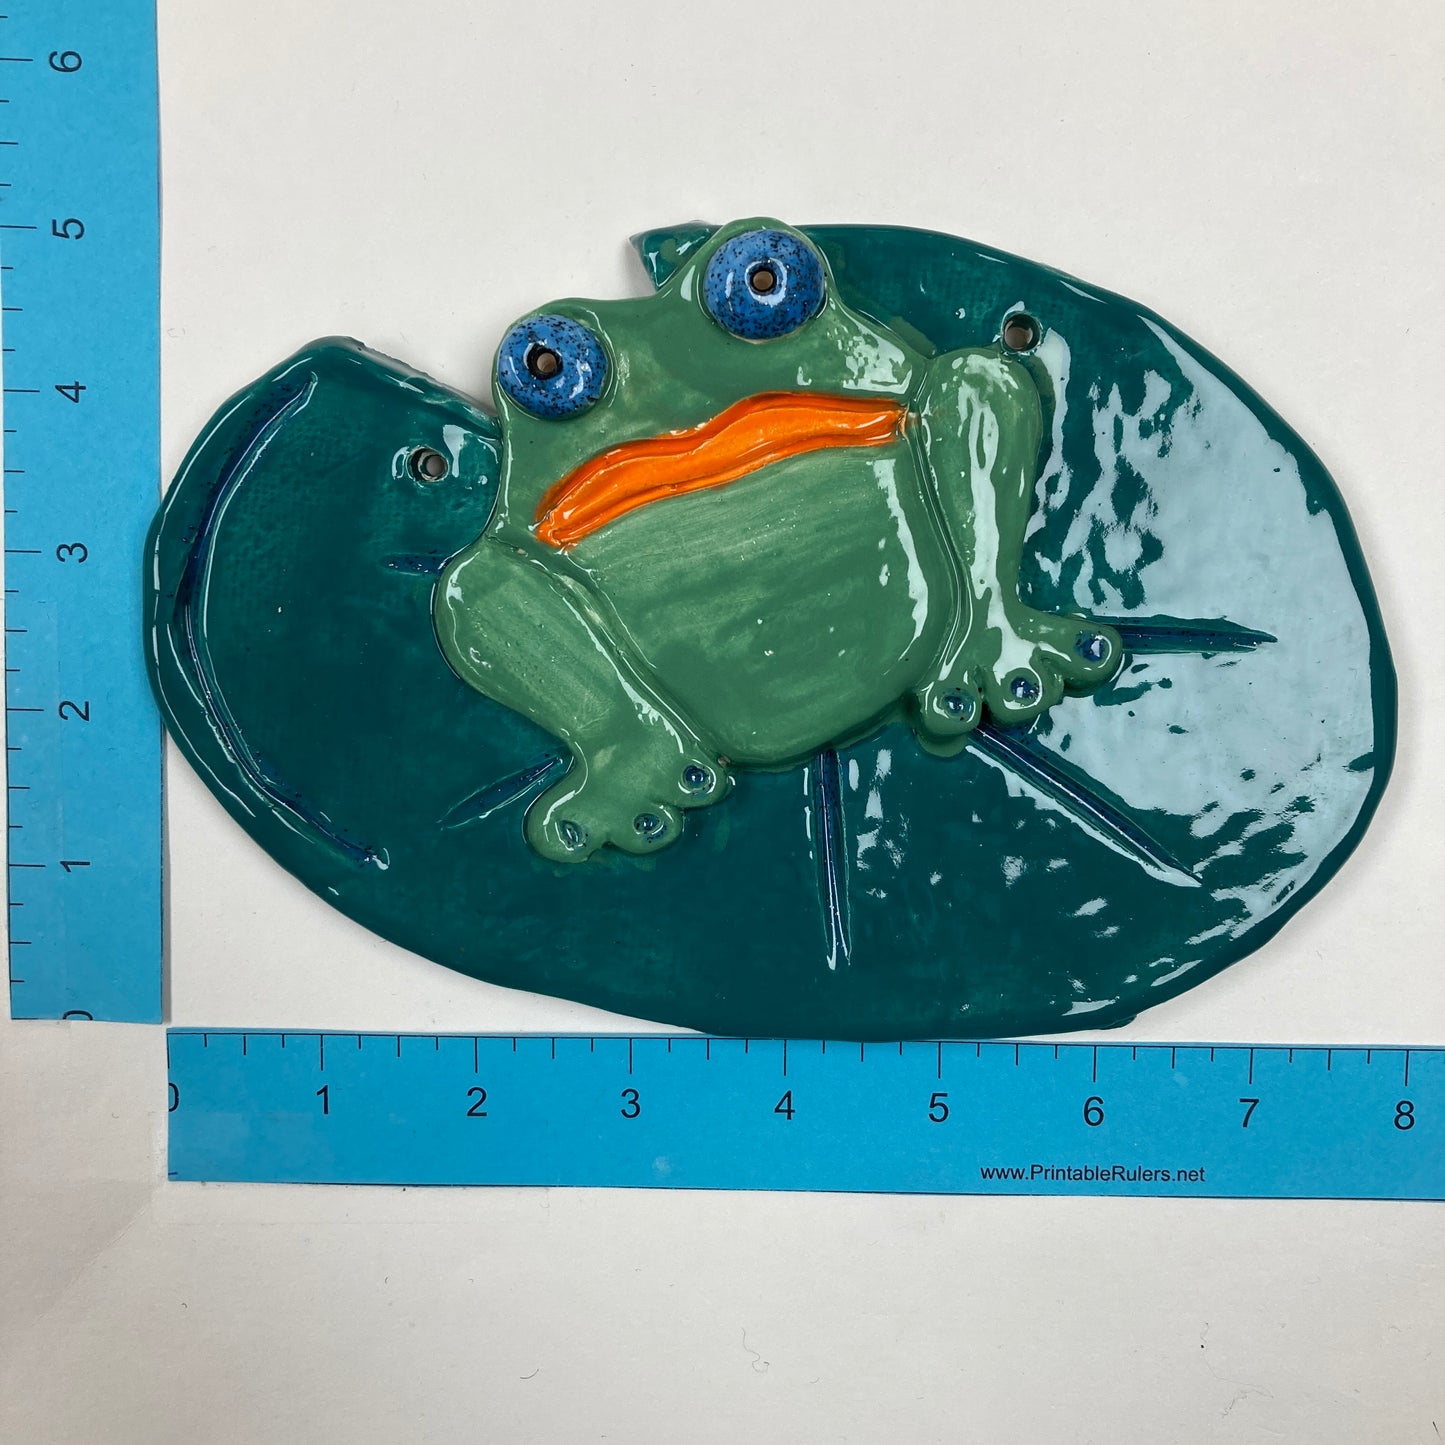 WATCH Resources Art Guild - Ceramic Arts Handmade Clay Crafts Frog 8-inch x 5-inch Glazed Fish-Frog by Lisa Uptain